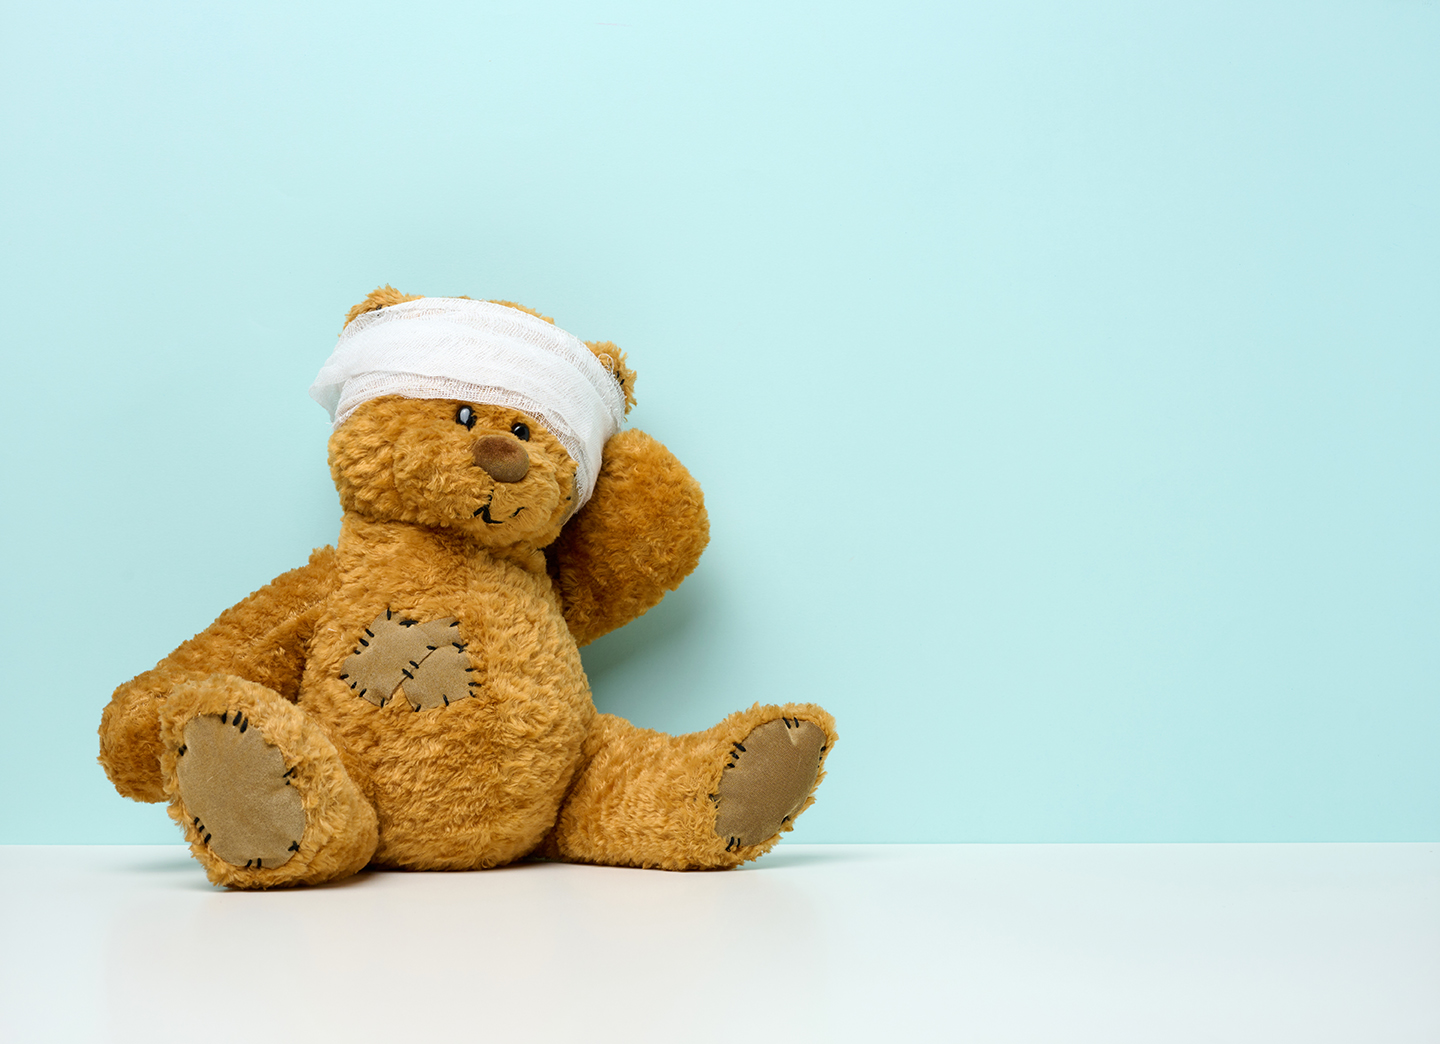 children’s toy teddy bear sits with a bandaged head. Childhood t